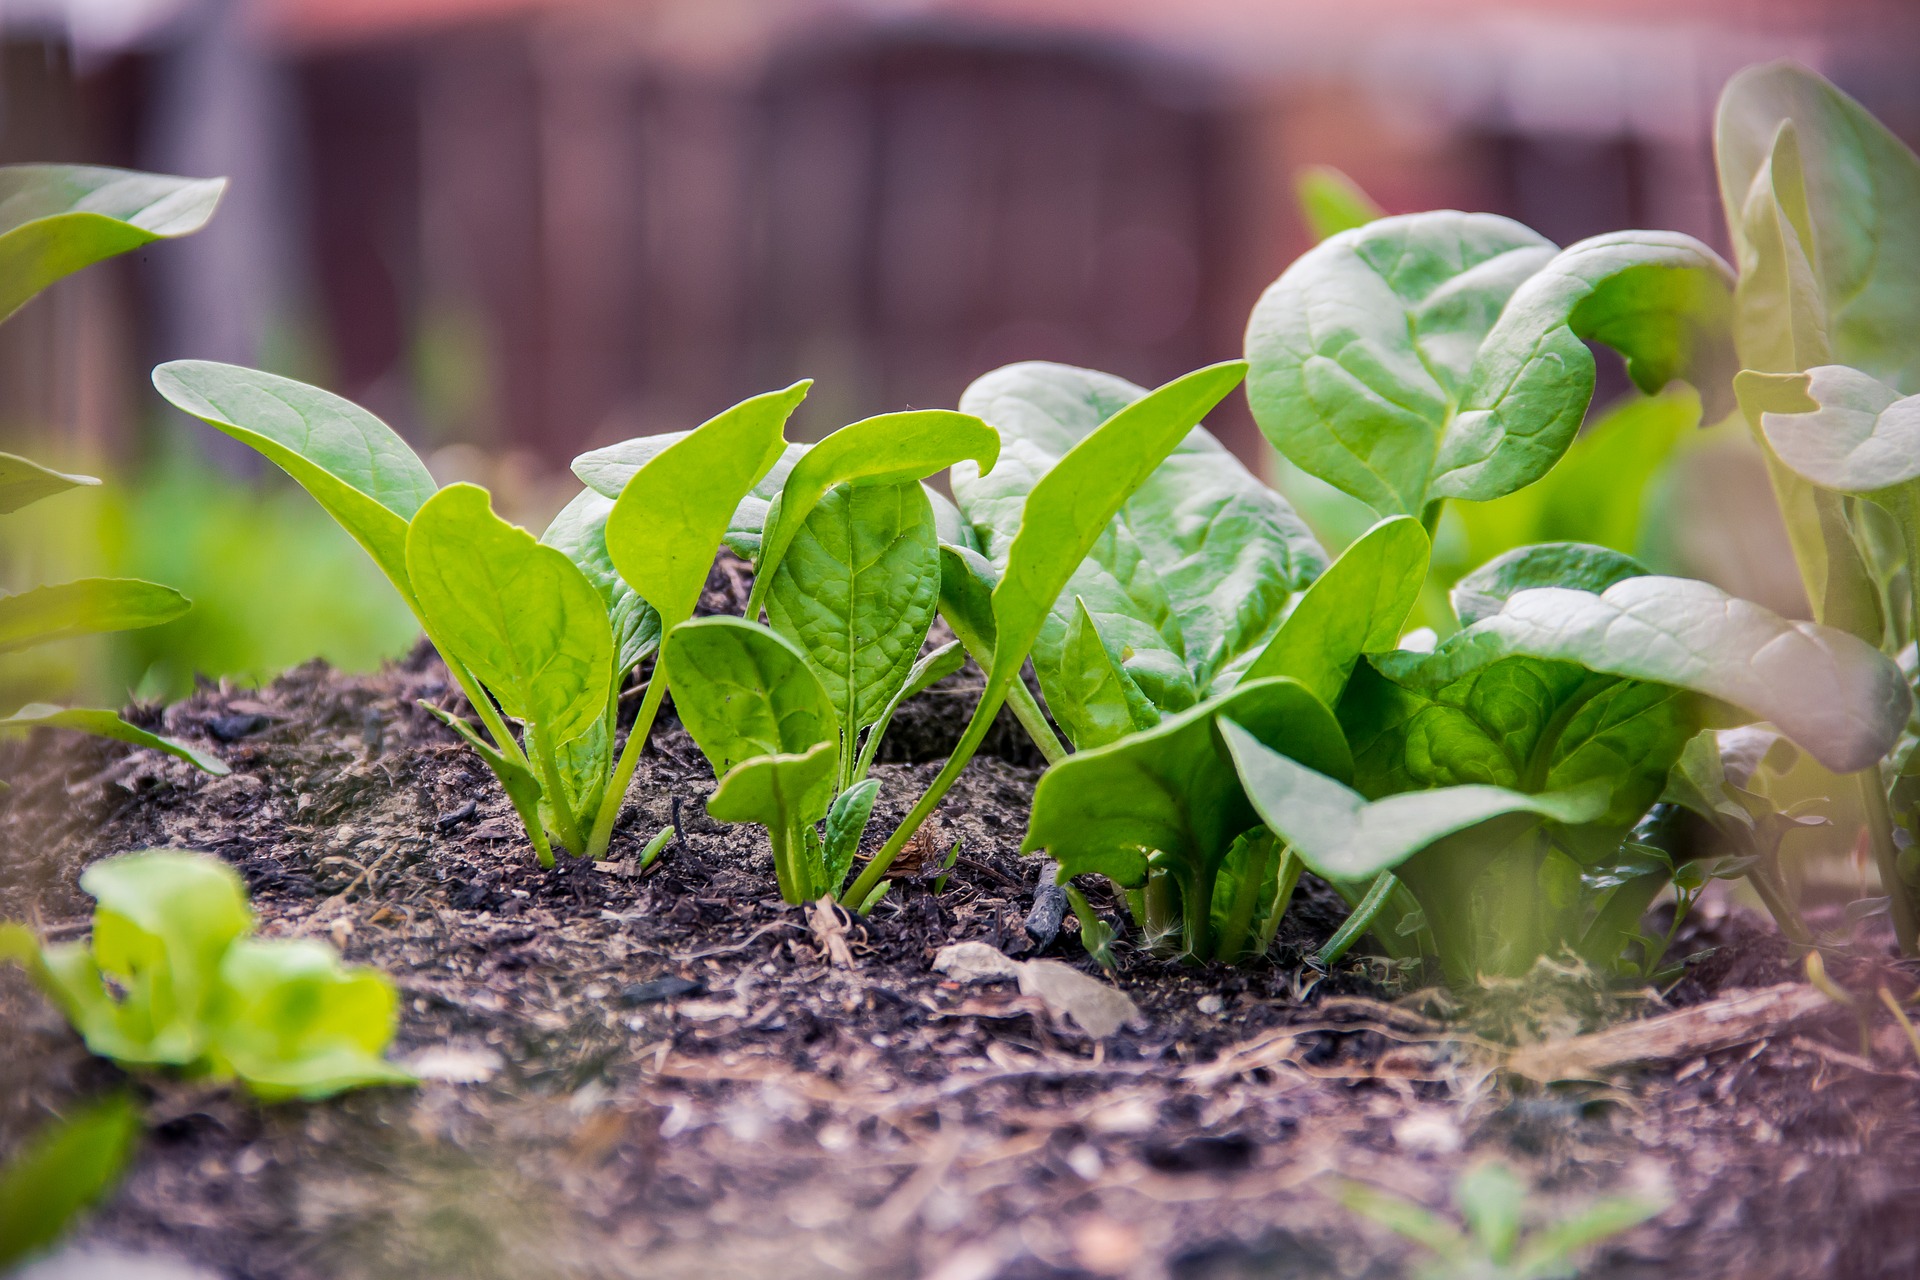 How to grow your own spinach